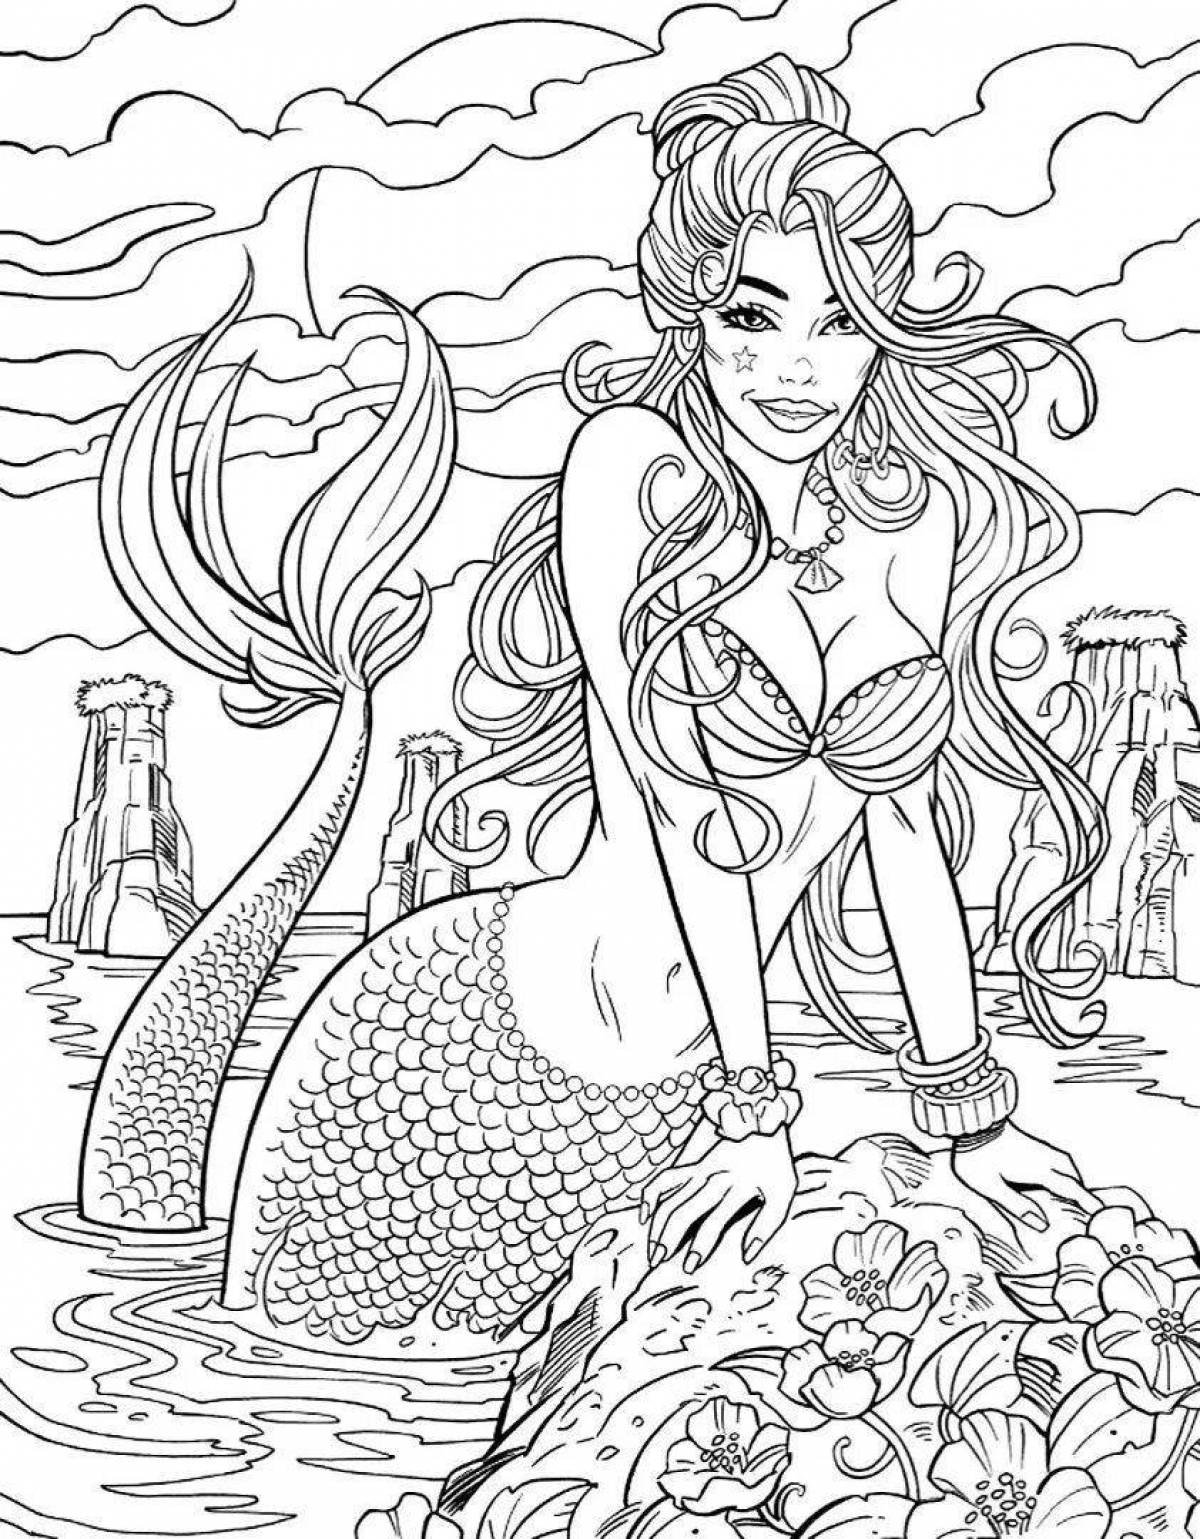 Exquisite adult coloring book